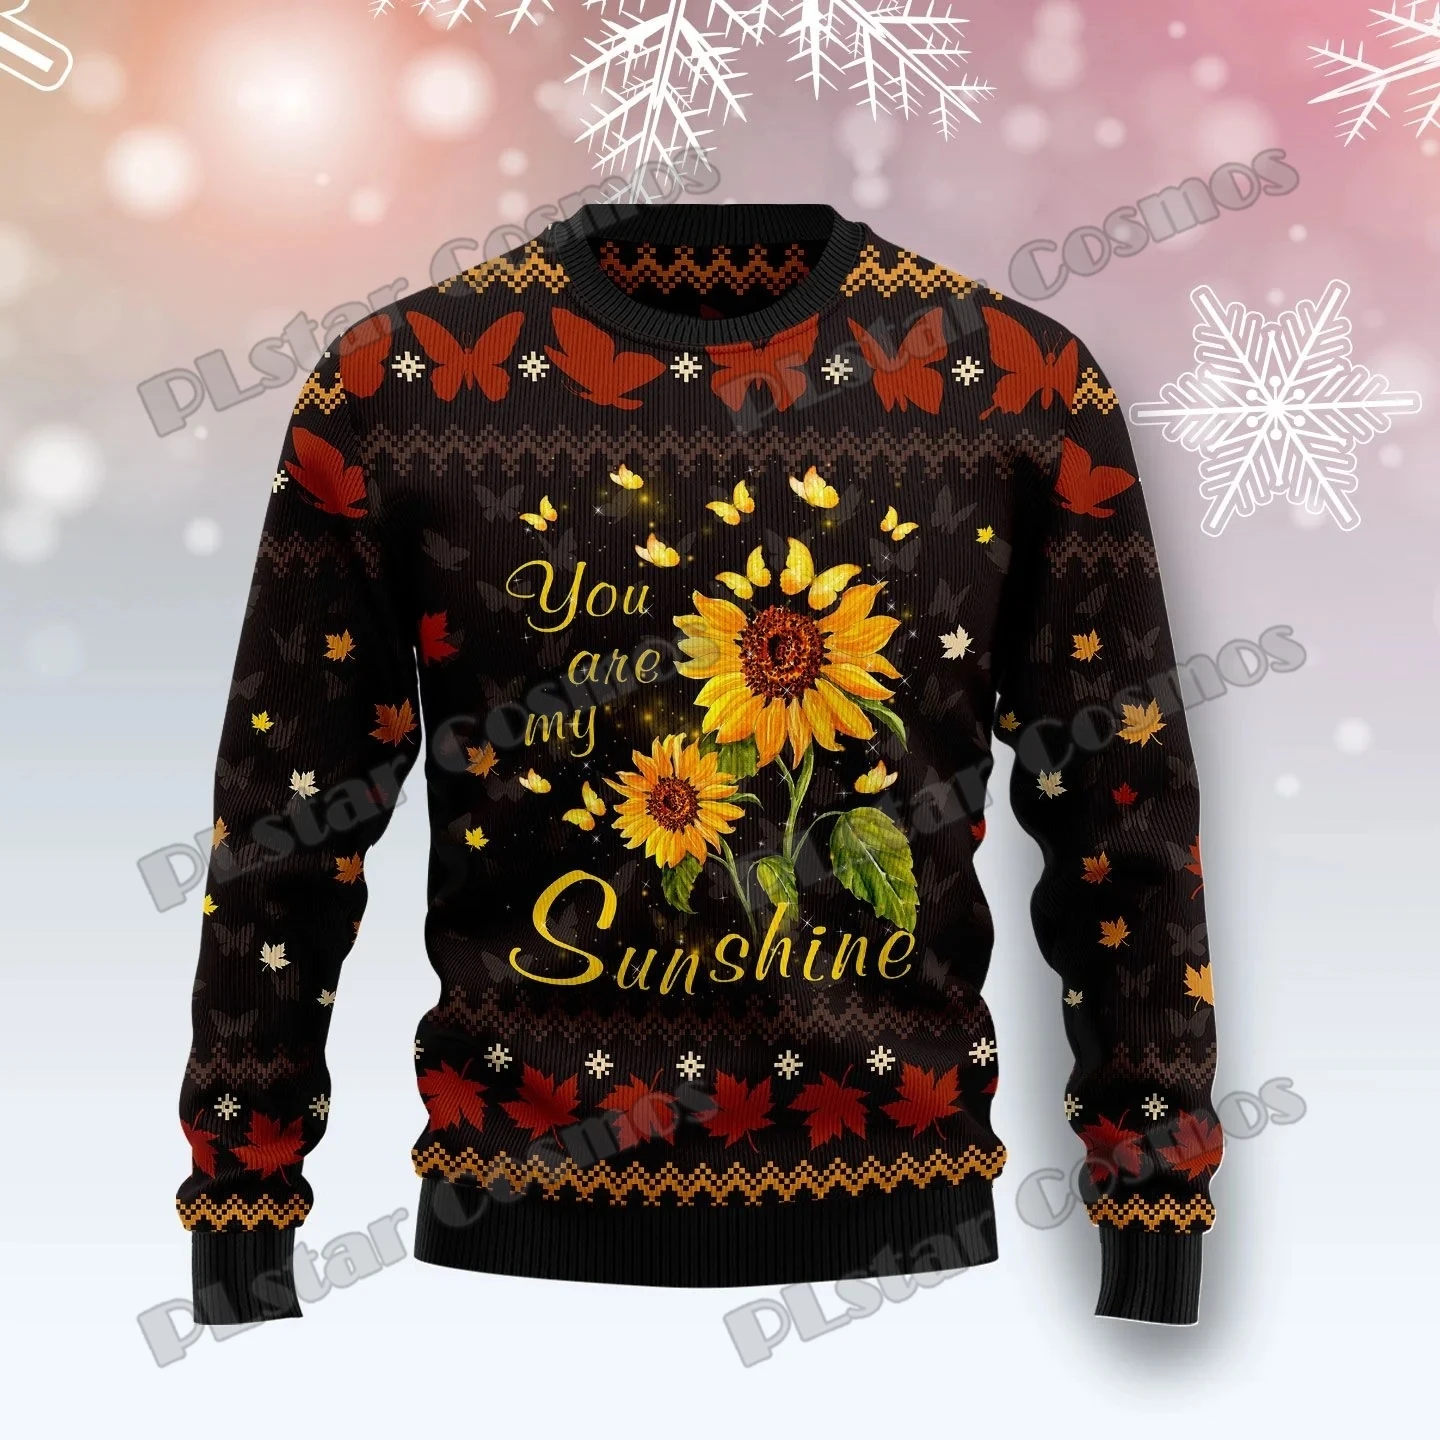 PLstar Cosmos Butterfly Sunshine 3D Printed Fashion Men's Ugly Christmas Sweater Winter Unisex Casual Knitwear Pullover MYY31